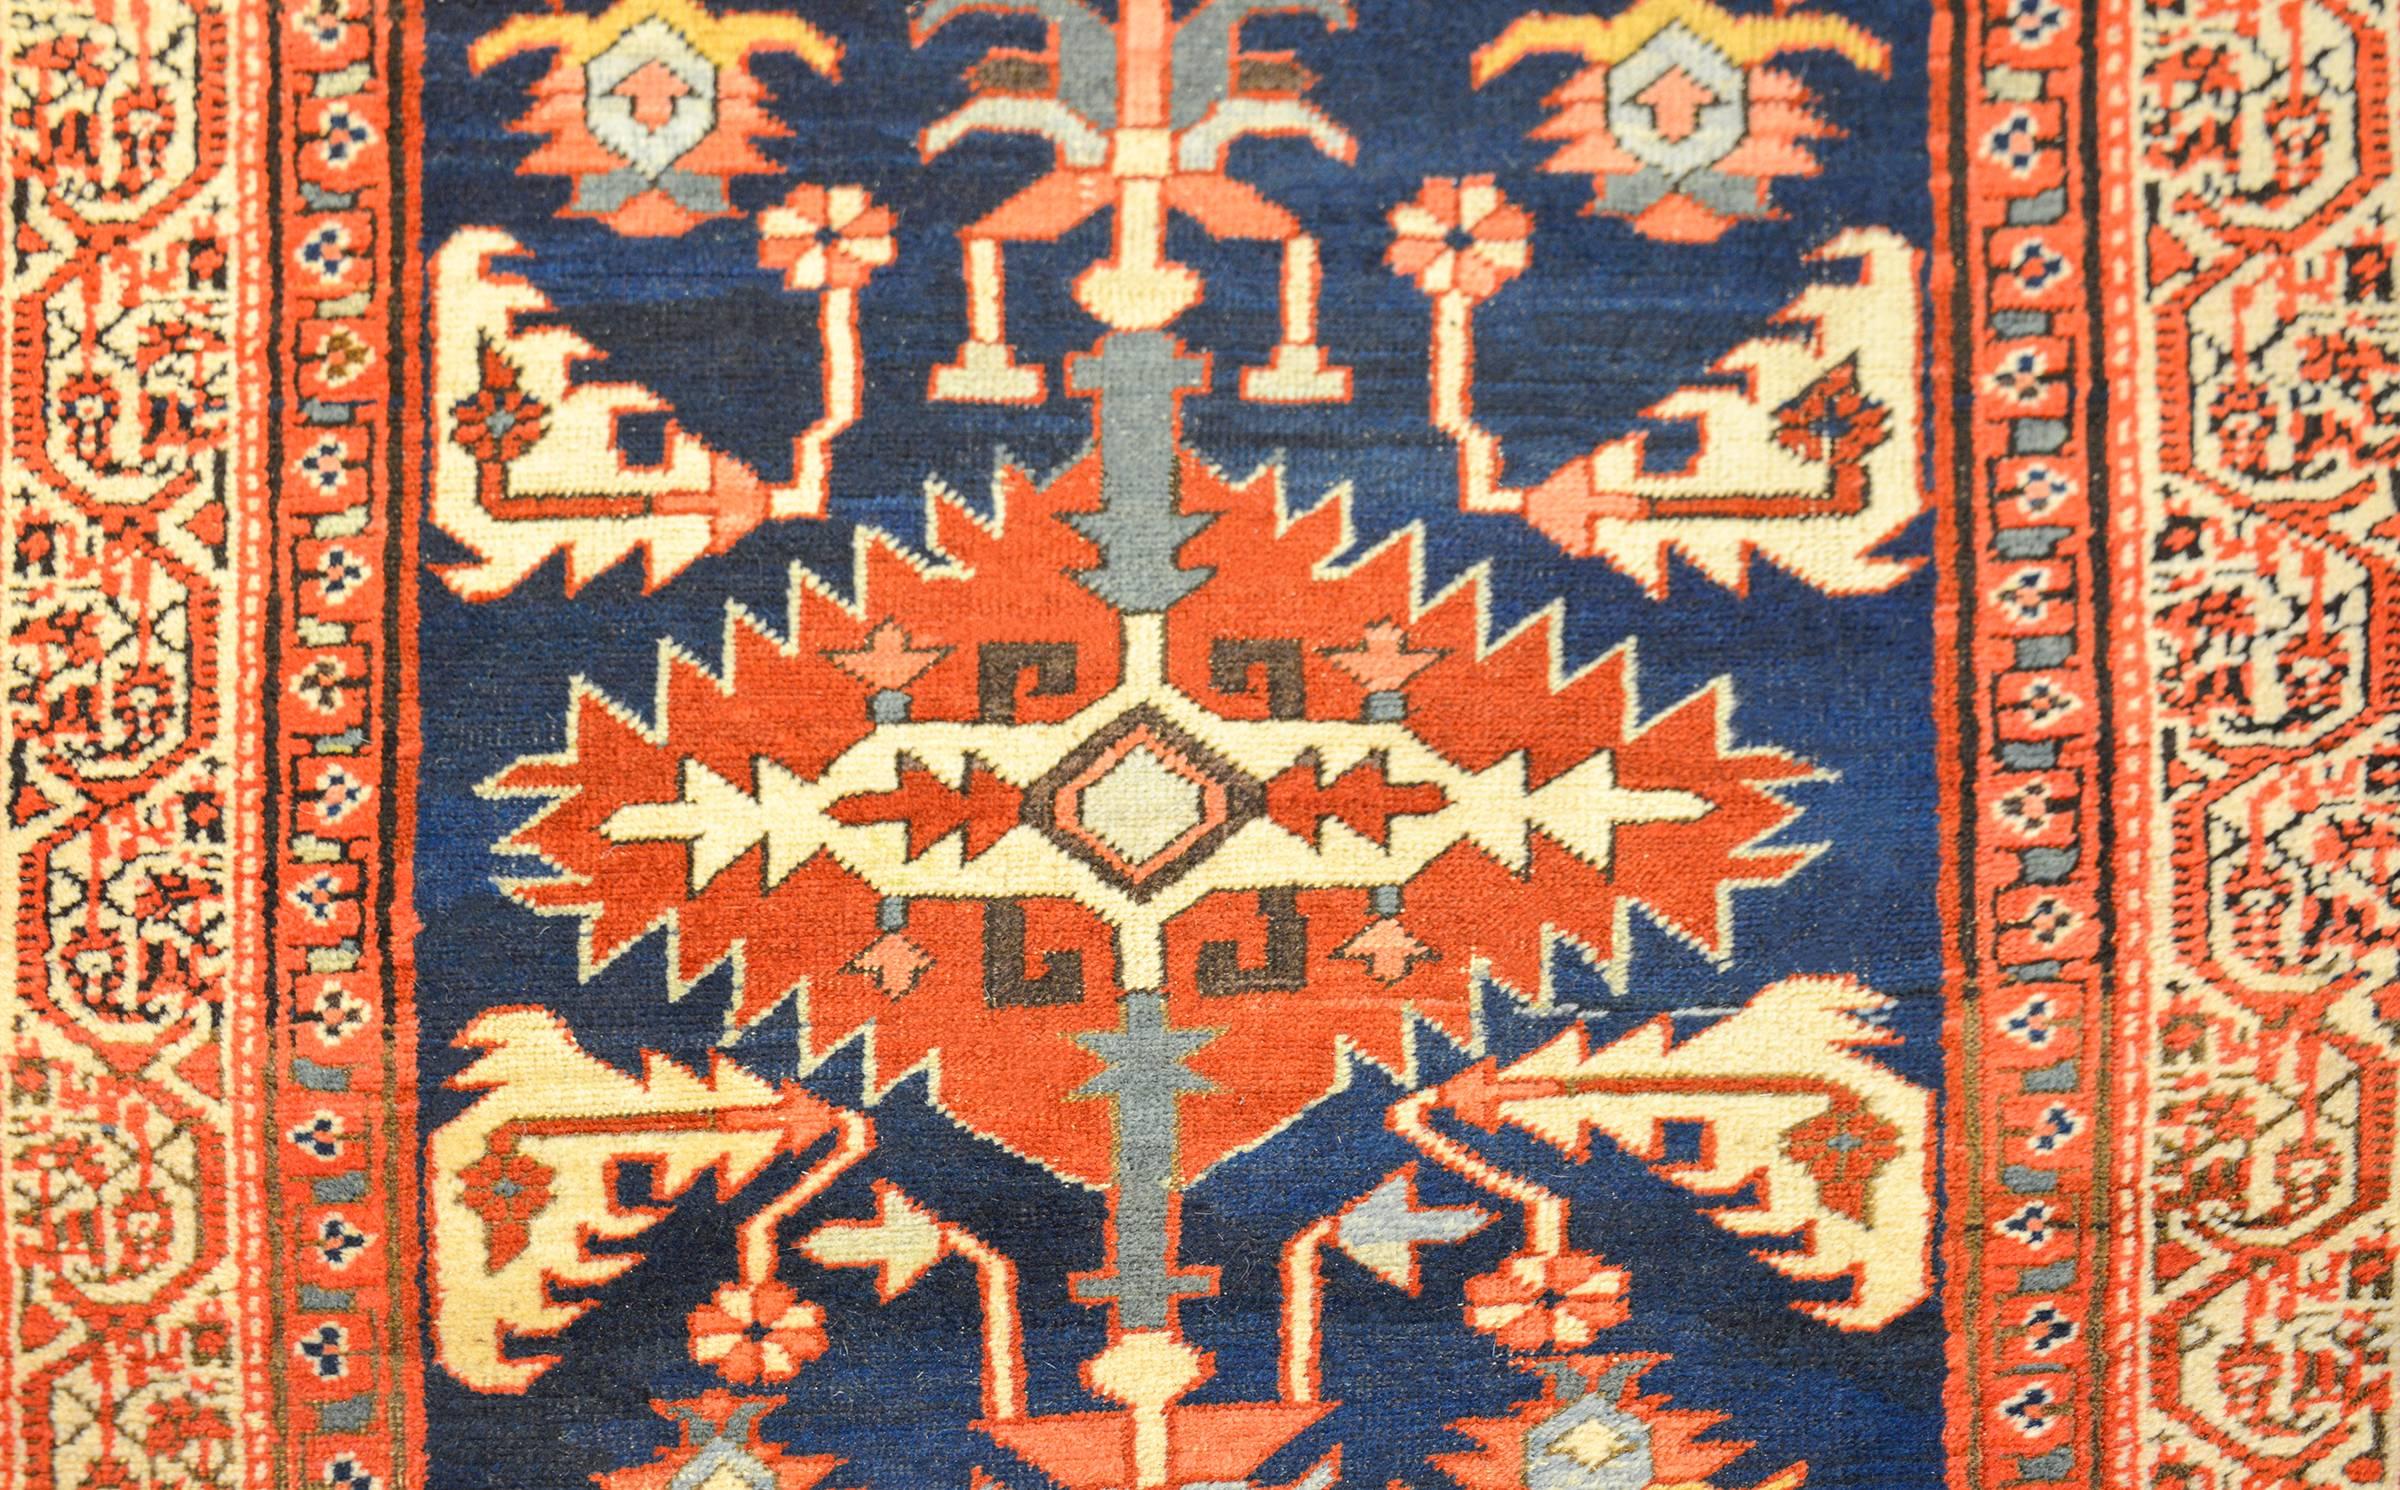 An exceptional late first quarter century Persian Bakshaish runner with incredible tribal geometric medallions woven in wonderful crimson, salmon, amidst scrolling vines and flowers on a dark indigo background. The border is wonderful with three